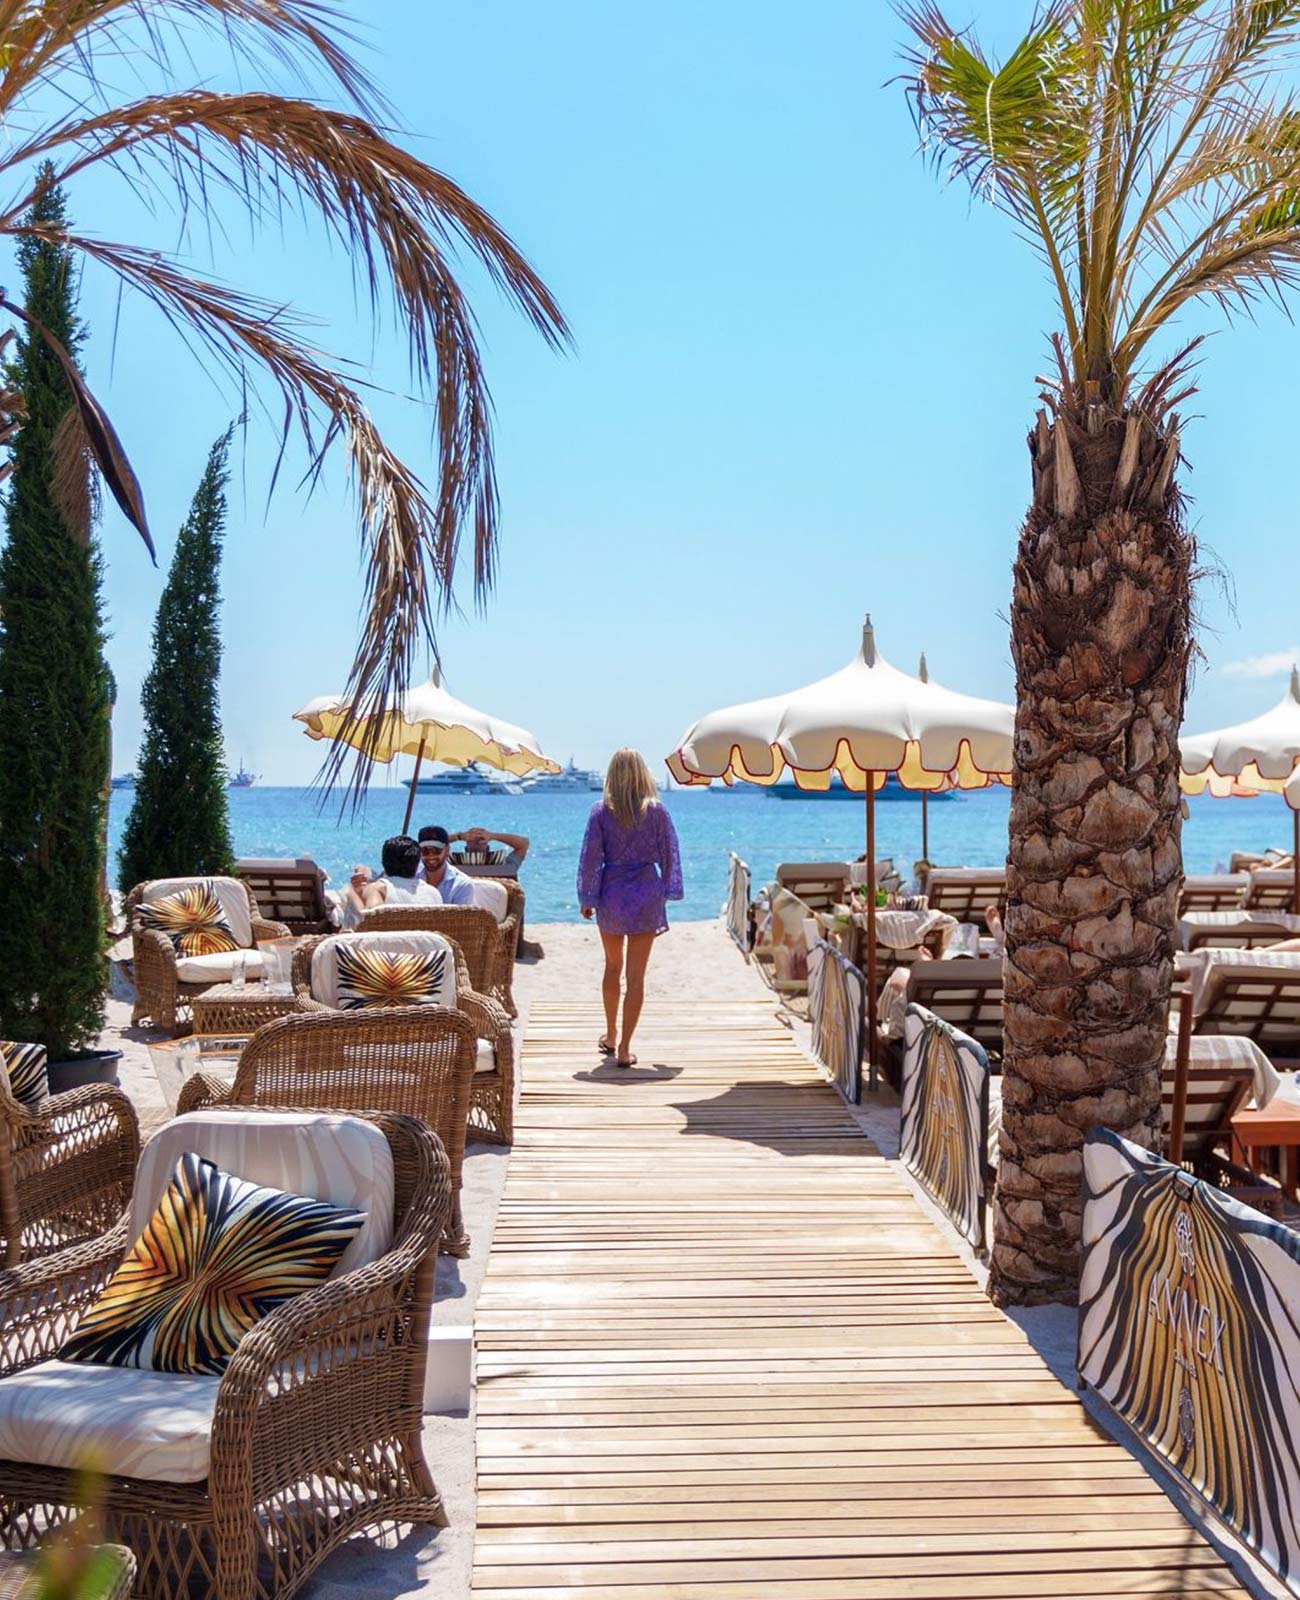 Annex Beach Restaurant is Dedicated to the Sun of Cannes